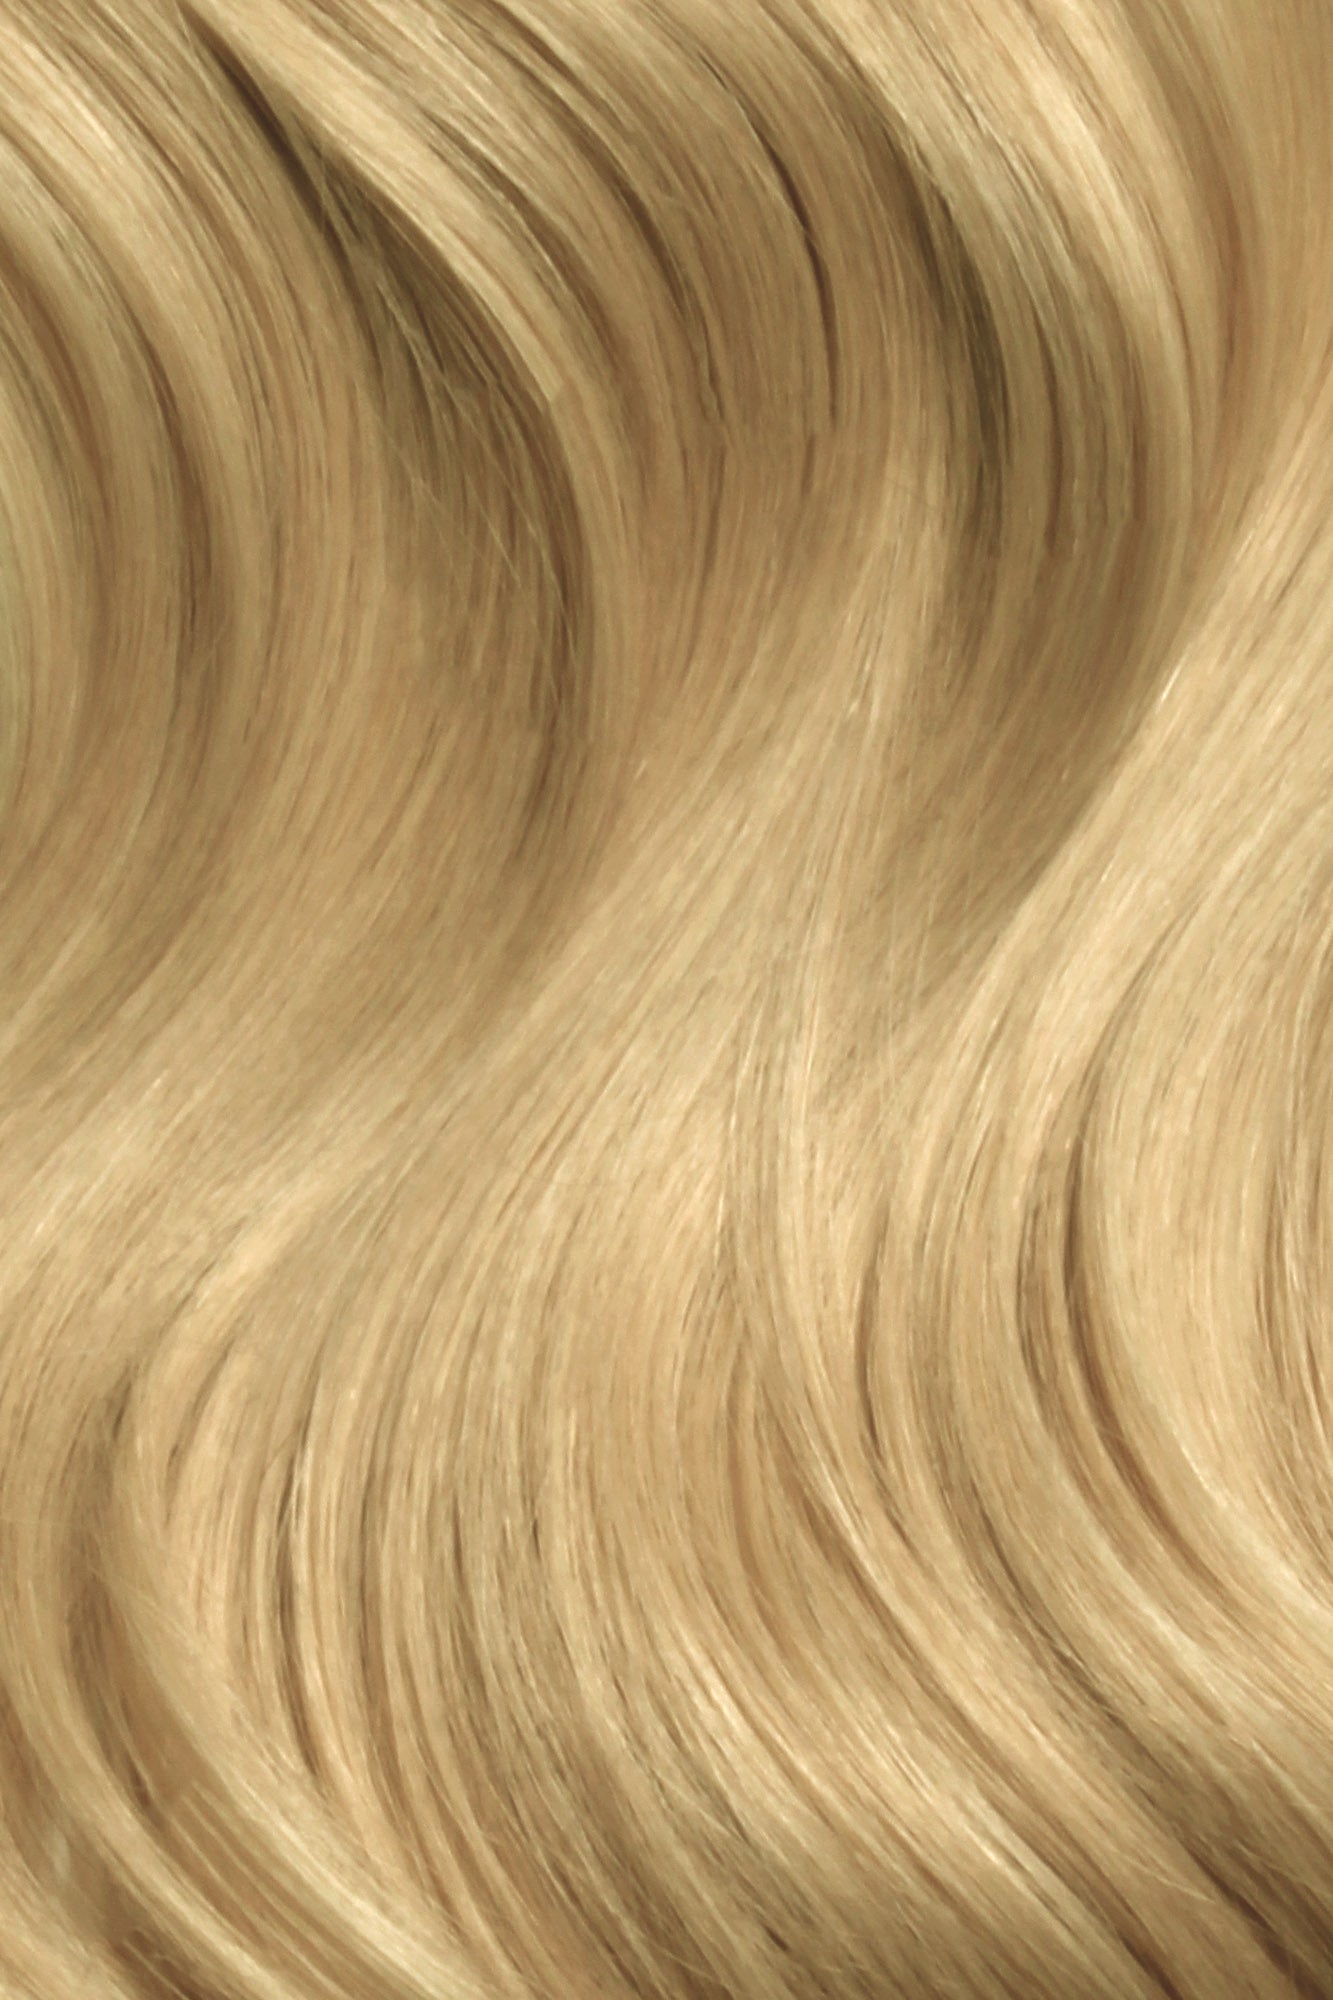 SEAMLESS® Flat Weft 20 Inches - SWAY Hair Extensions Hollywood-Blonde-18-613 Natural SEAMLESS® Flat Weft 20 Inches extensions. Thin, flexible, and discreet. 100% Double Drawn Remy Human Hair. Versatile and reusable